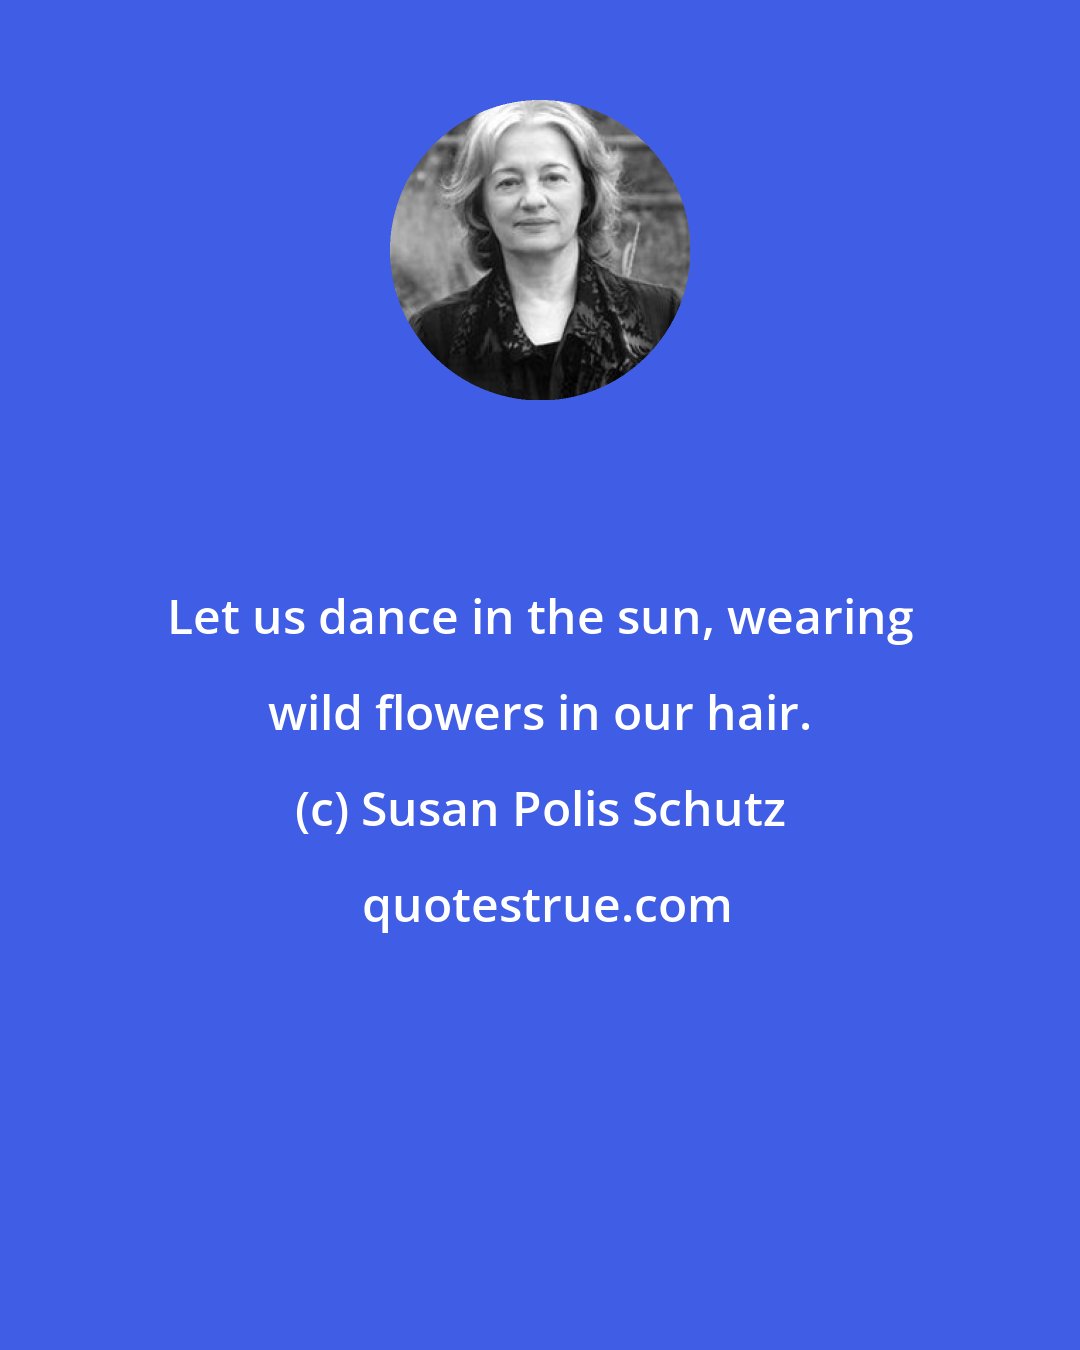 Susan Polis Schutz: Let us dance in the sun, wearing wild flowers in our hair.